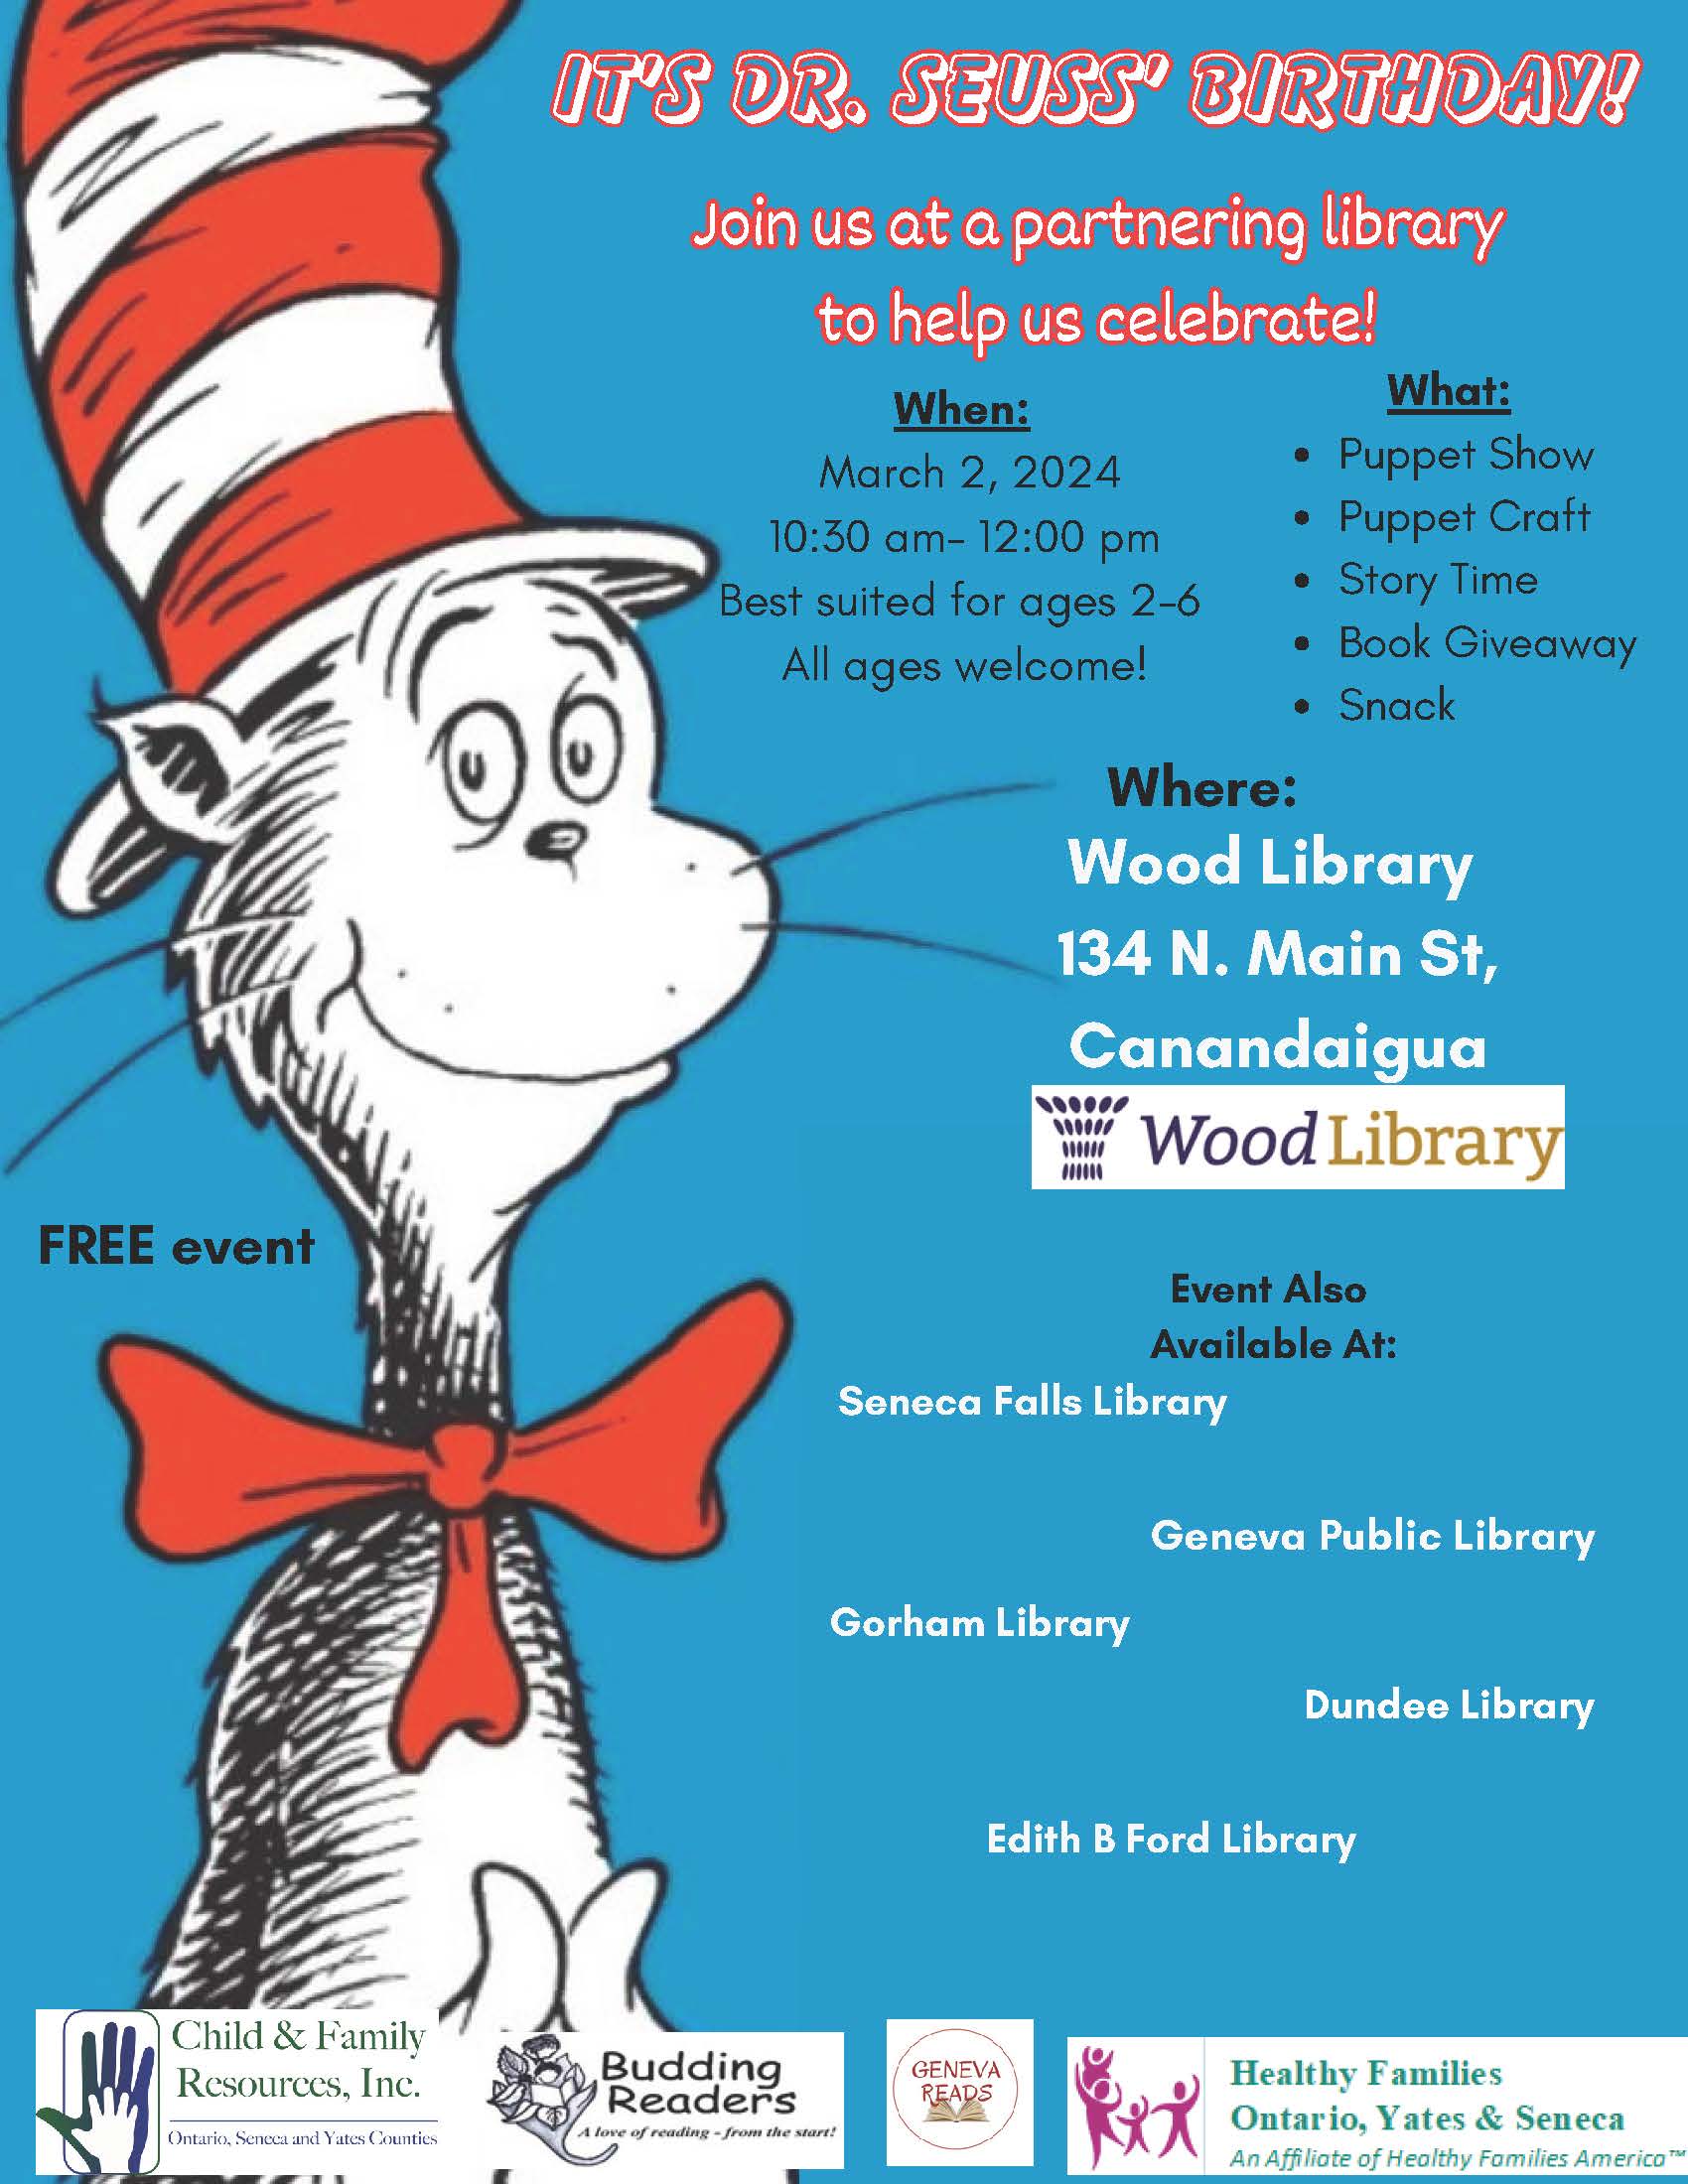 Dr. Seuss's Cat in the Hat character with program information details